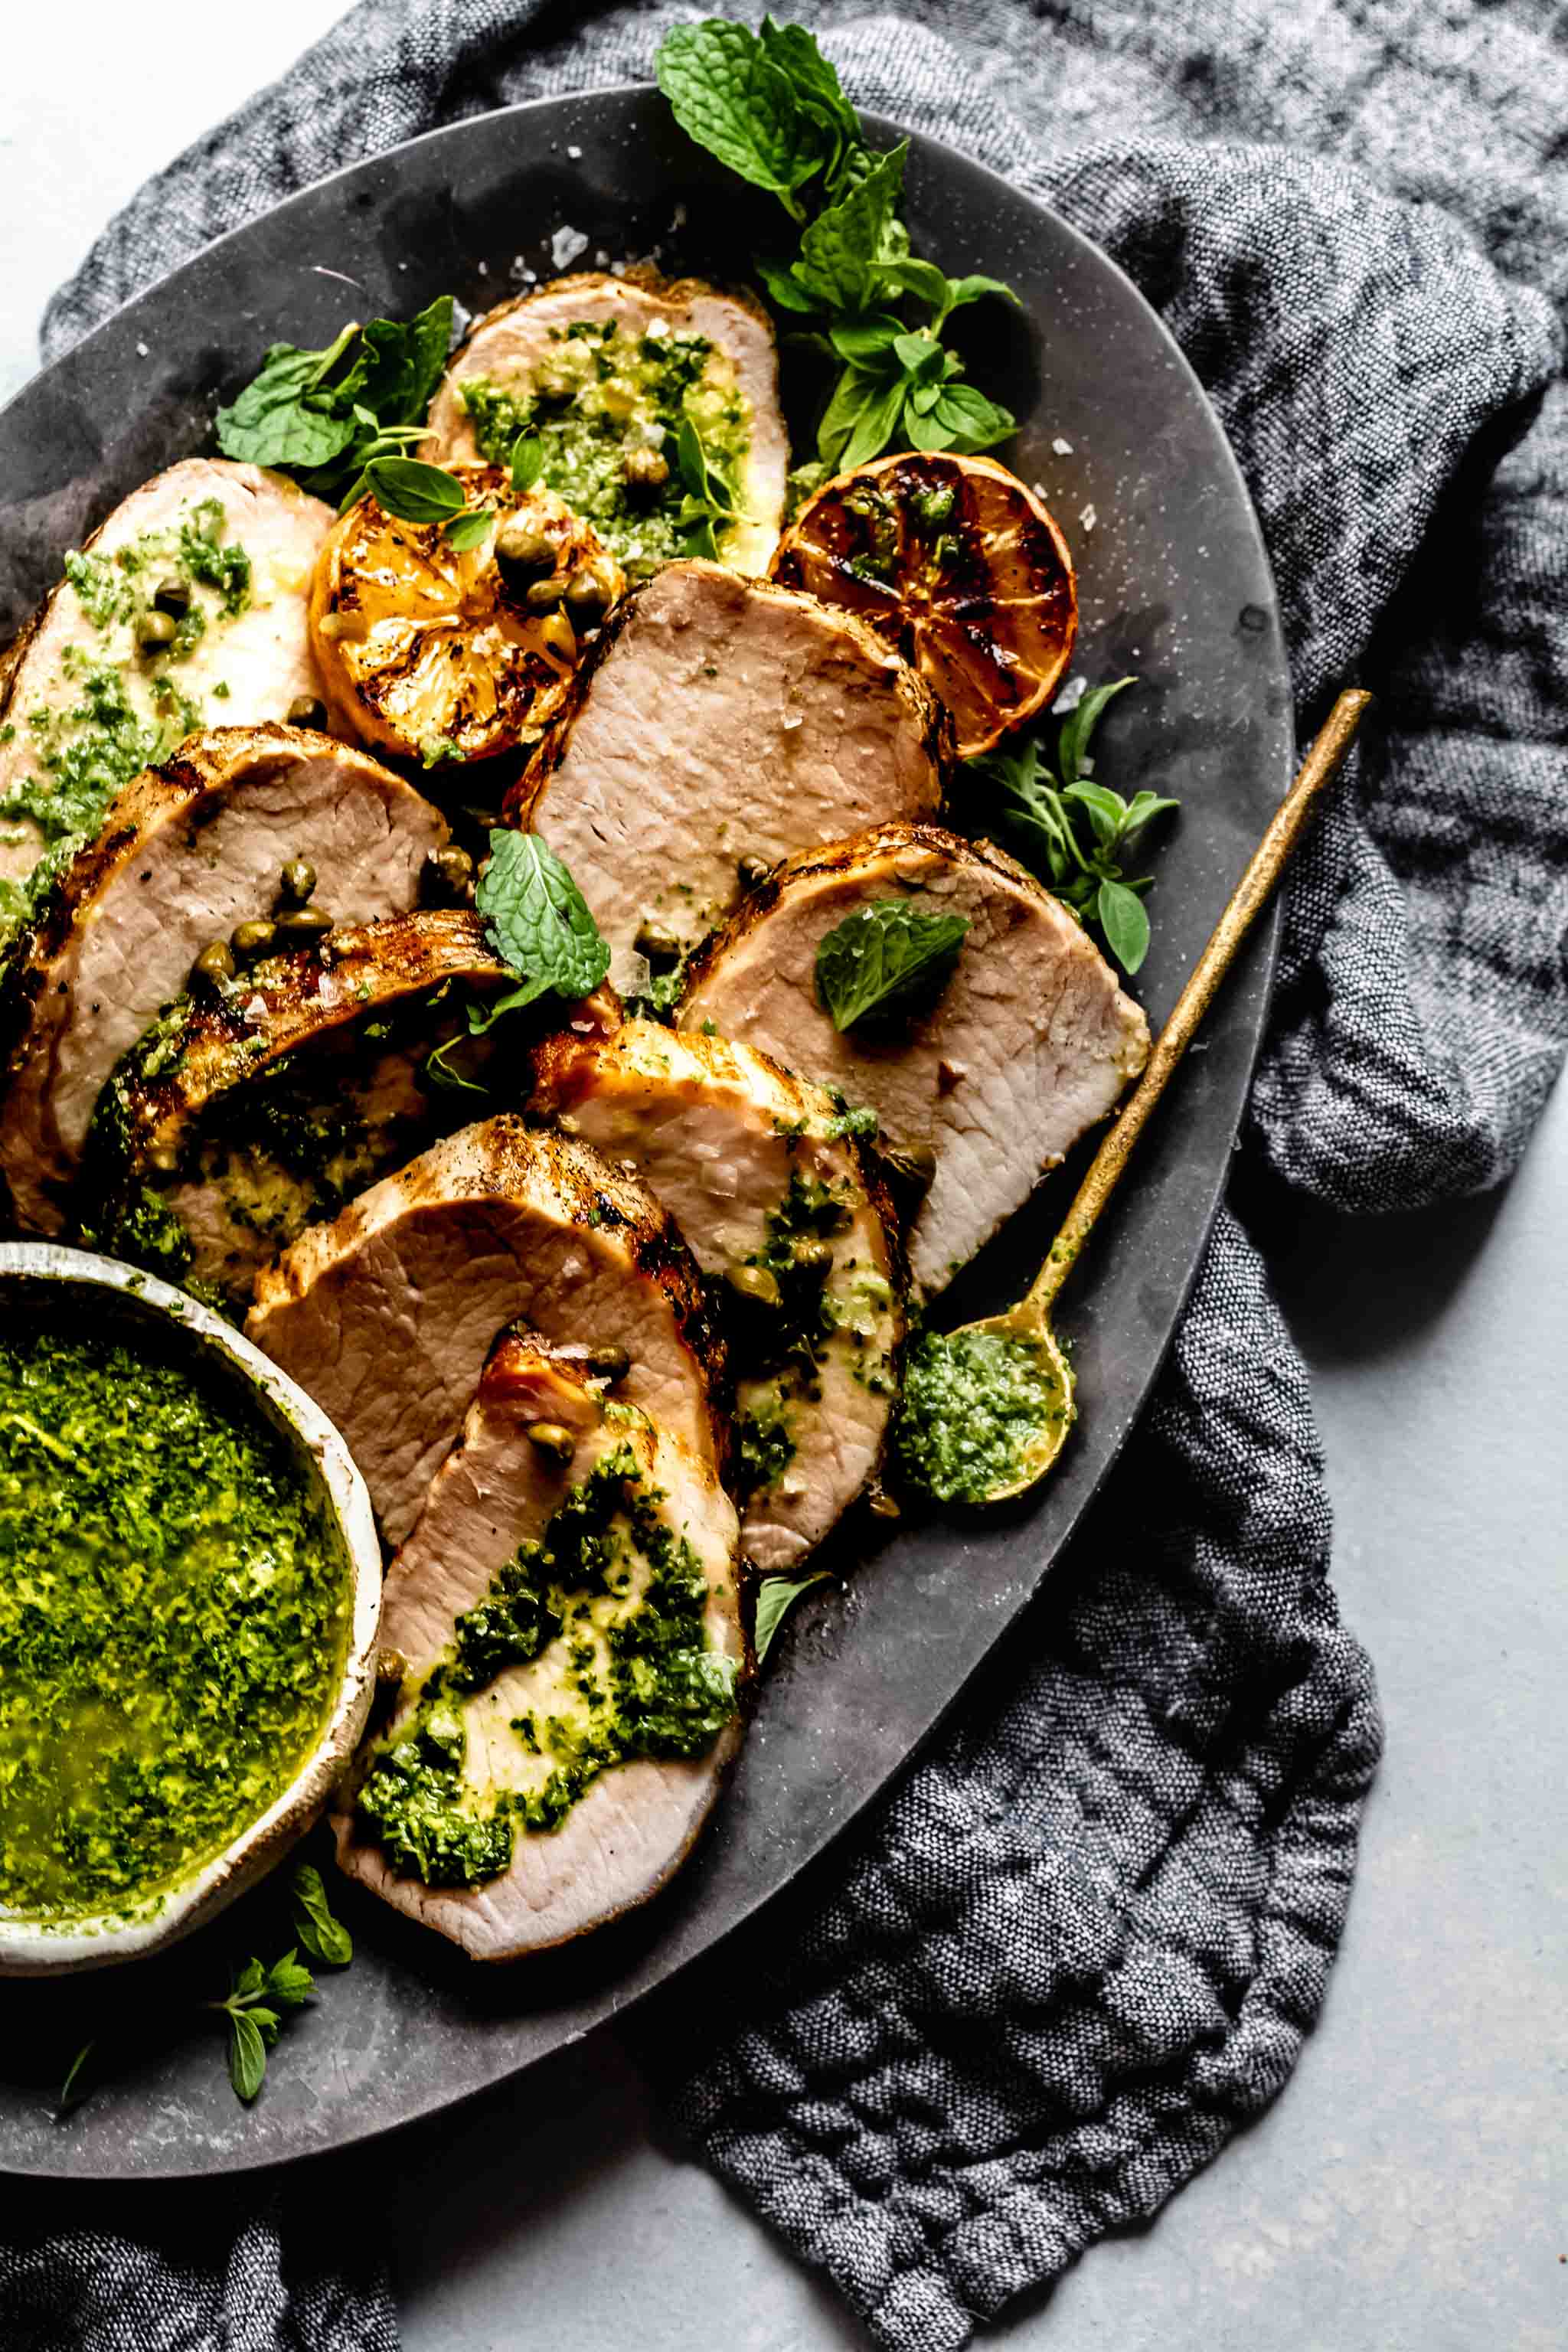 Slices of grilled pork tenderloin on plate drizzled with charred lemon chimichurri.